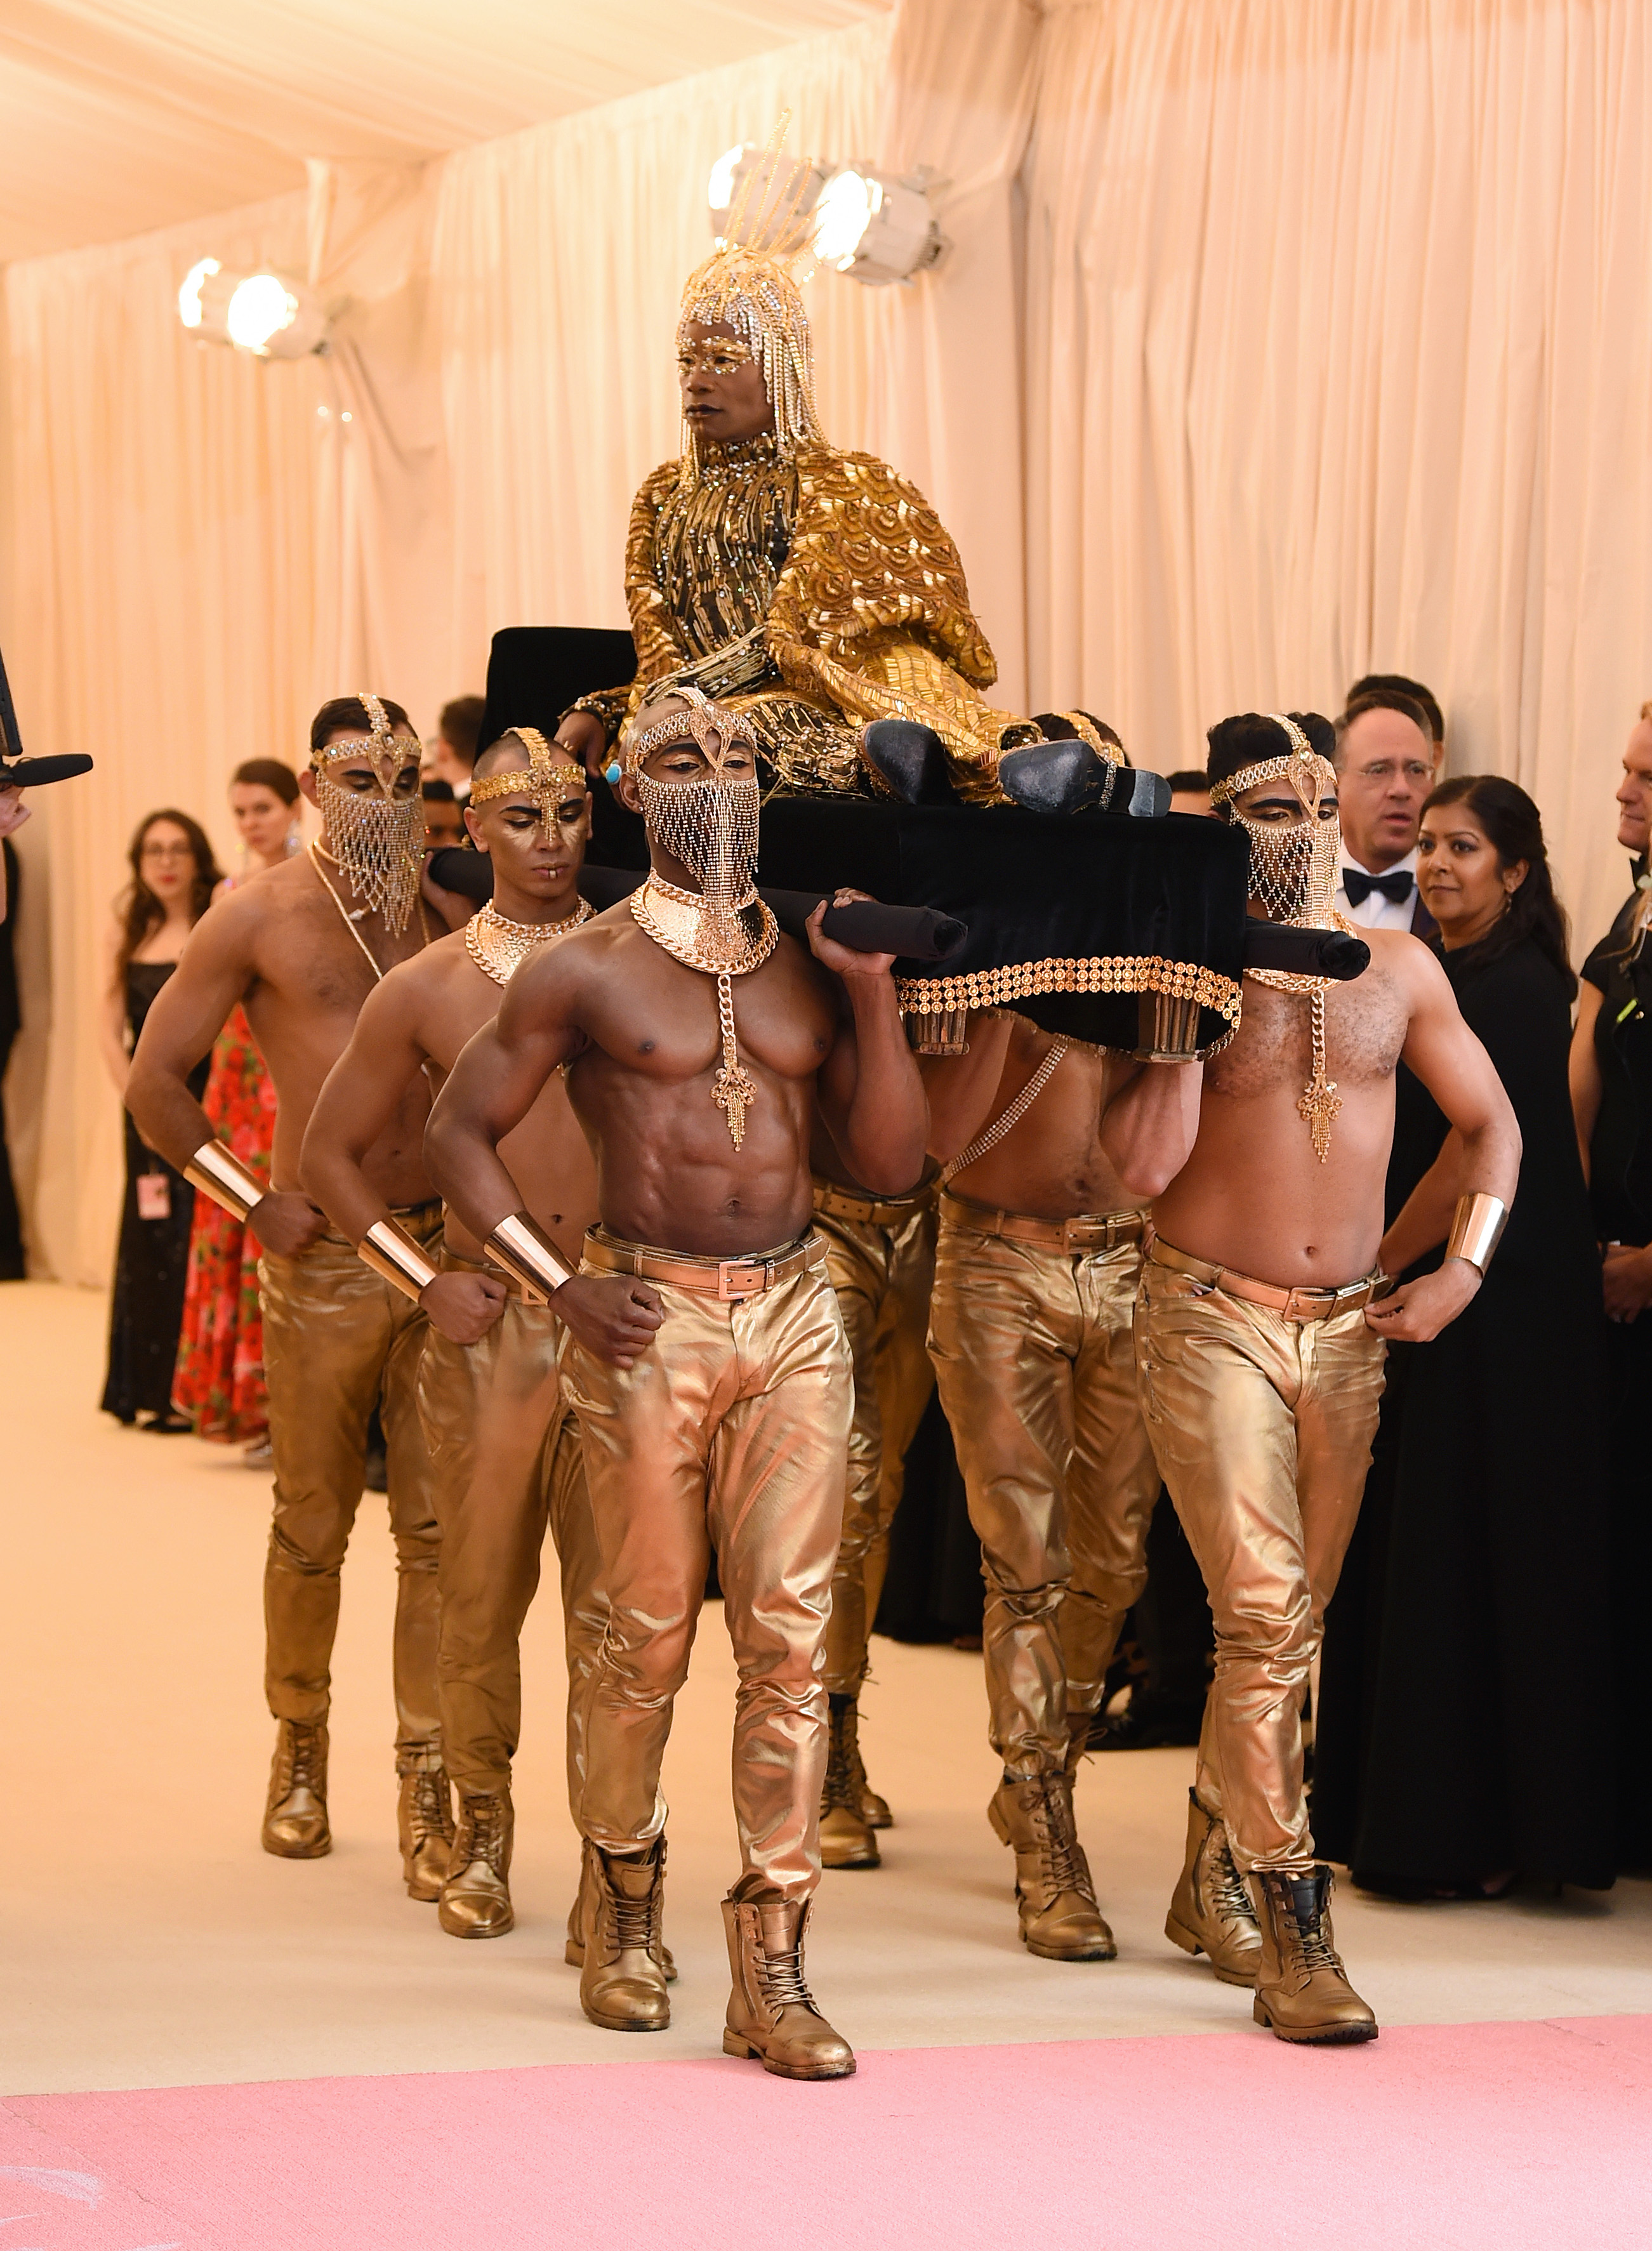 Move over Katy Perry, Billy Porter enters the Met Gala with wings ICON